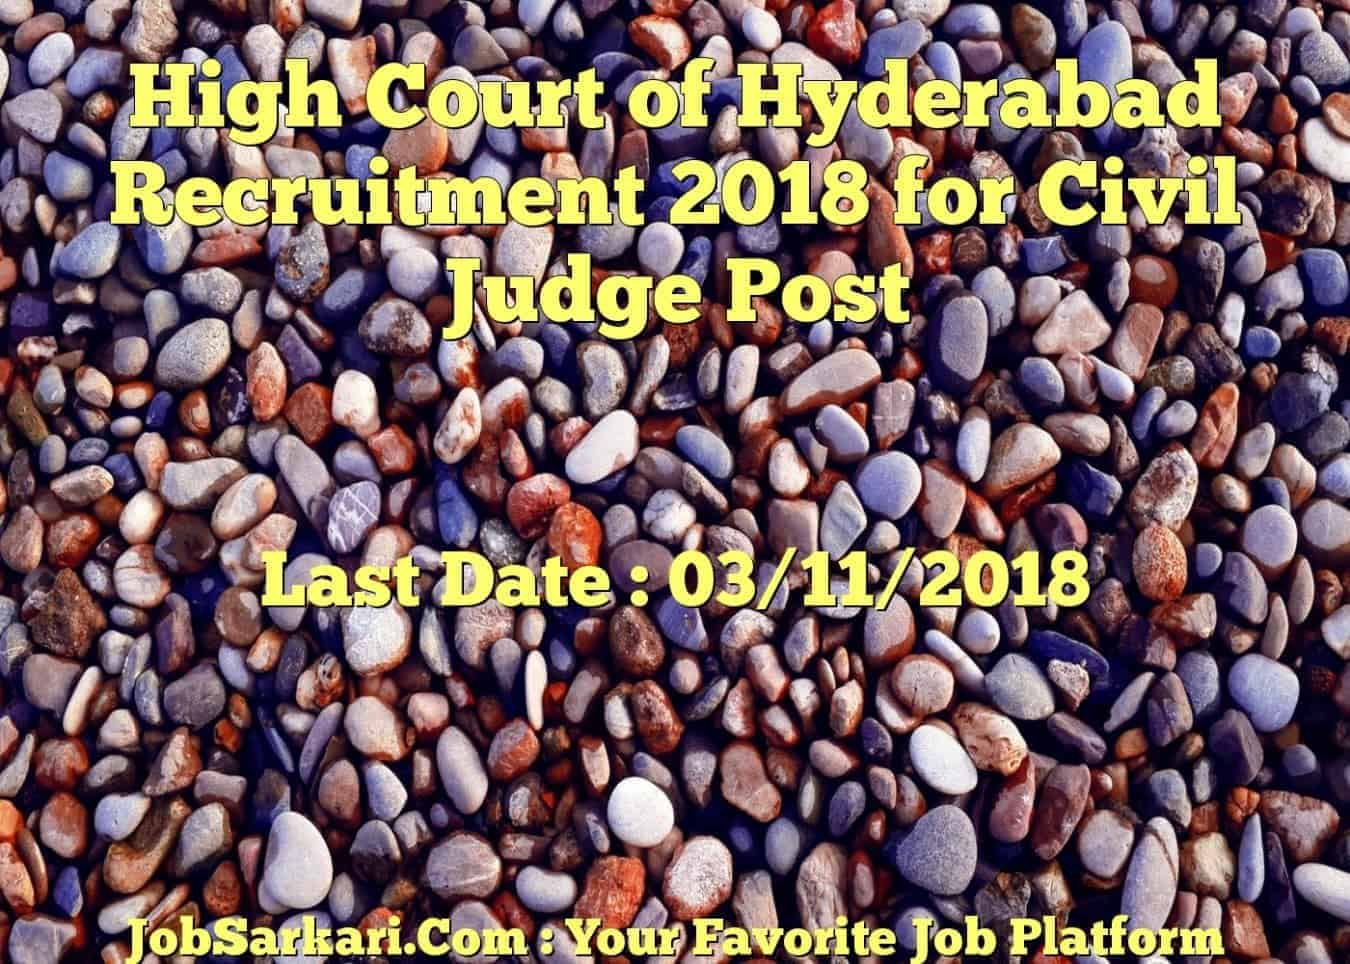 High Court of Hyderabad Recruitment 2018 for Civil Judge Post